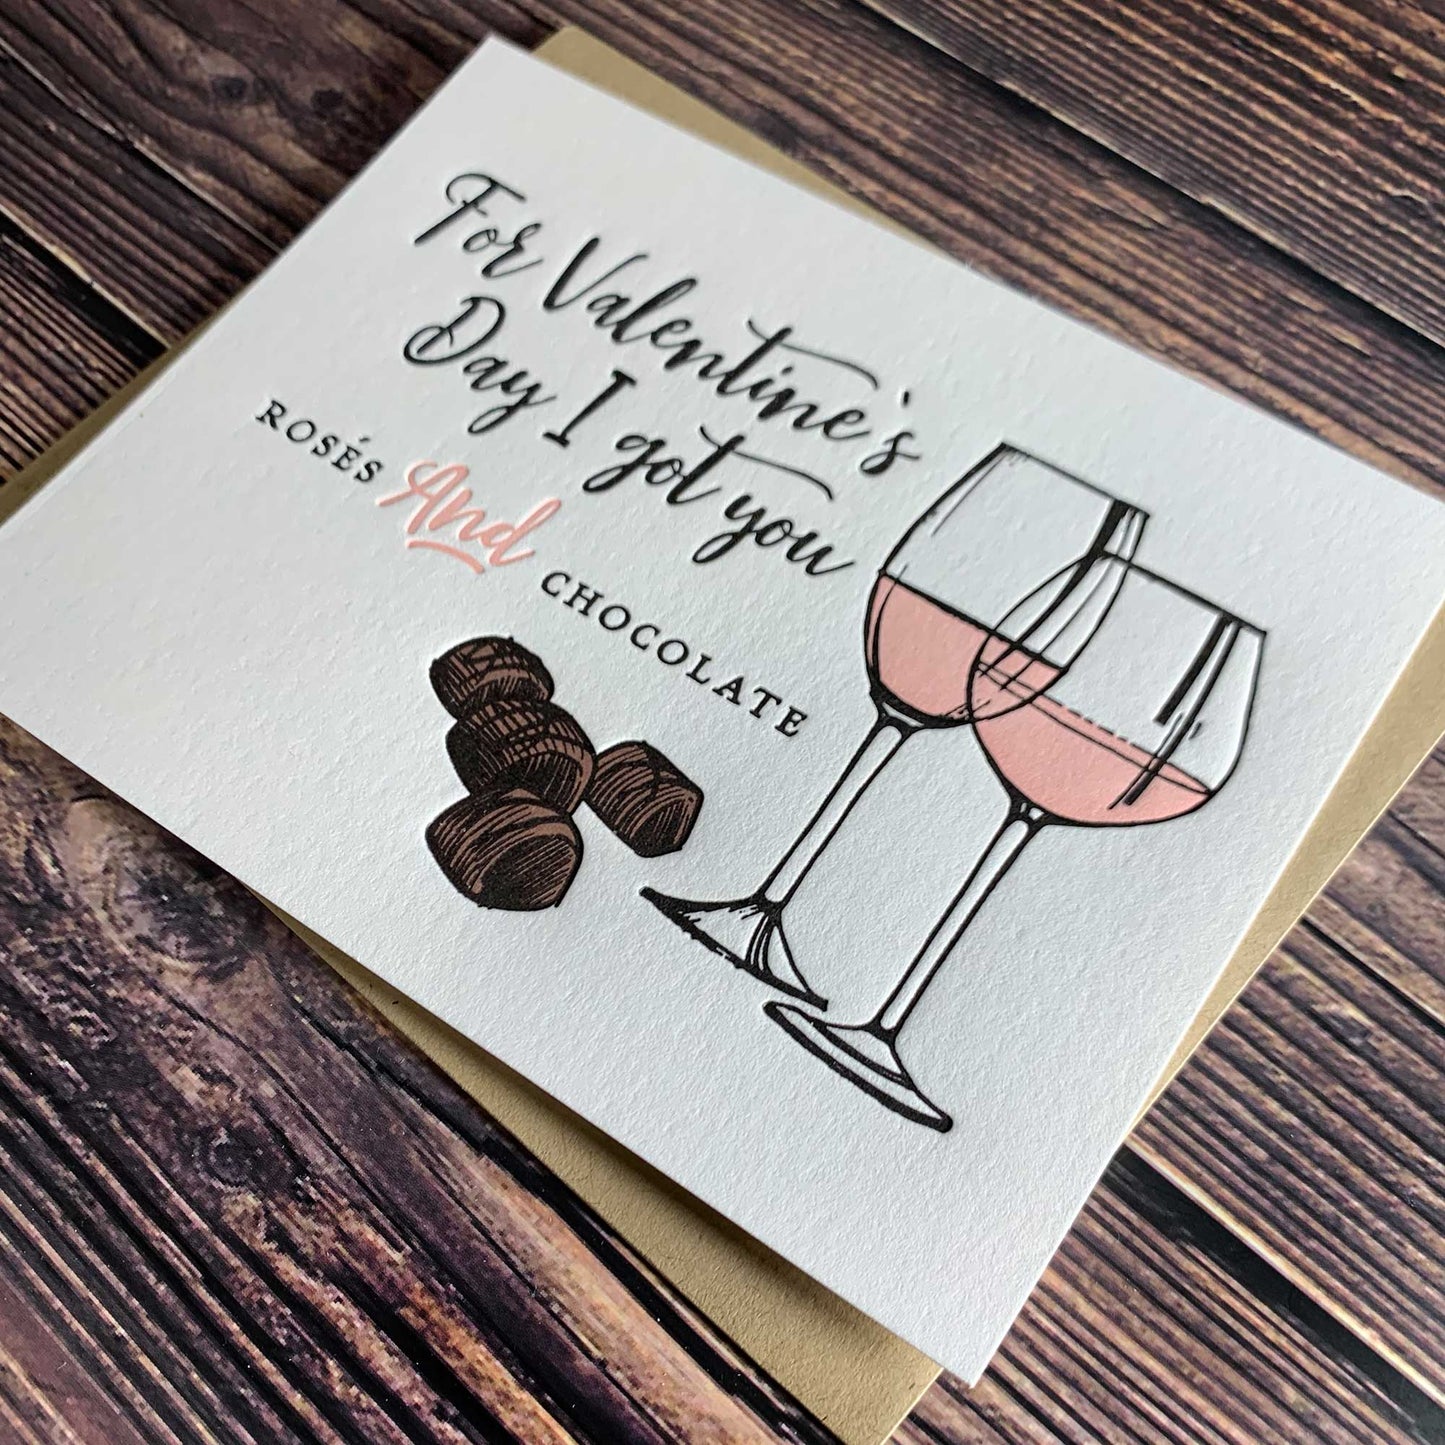 For Valentine's Day I got you rosés and chocolate, Funny Valentine's Day Card, etterpress printed, view shows letterpress impression, includes envelope